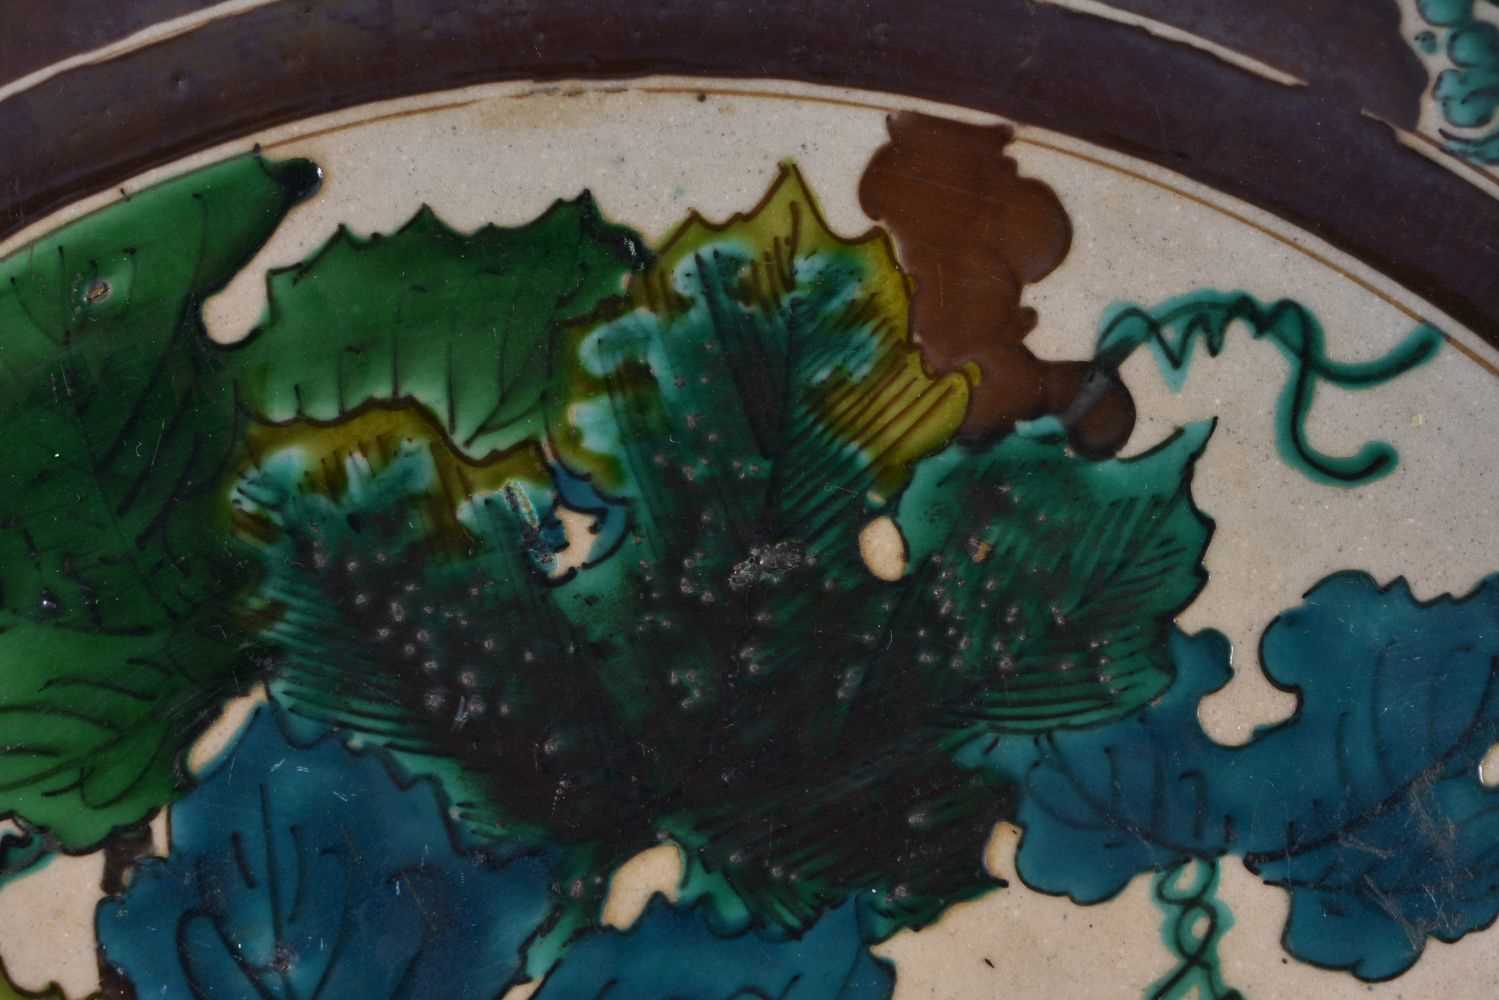 A LARGE 18TH CENTURY JAPANESE EDO PERIOD AO KUTANI DISH painted with flowers and landscapes. 37 cm - Image 4 of 6